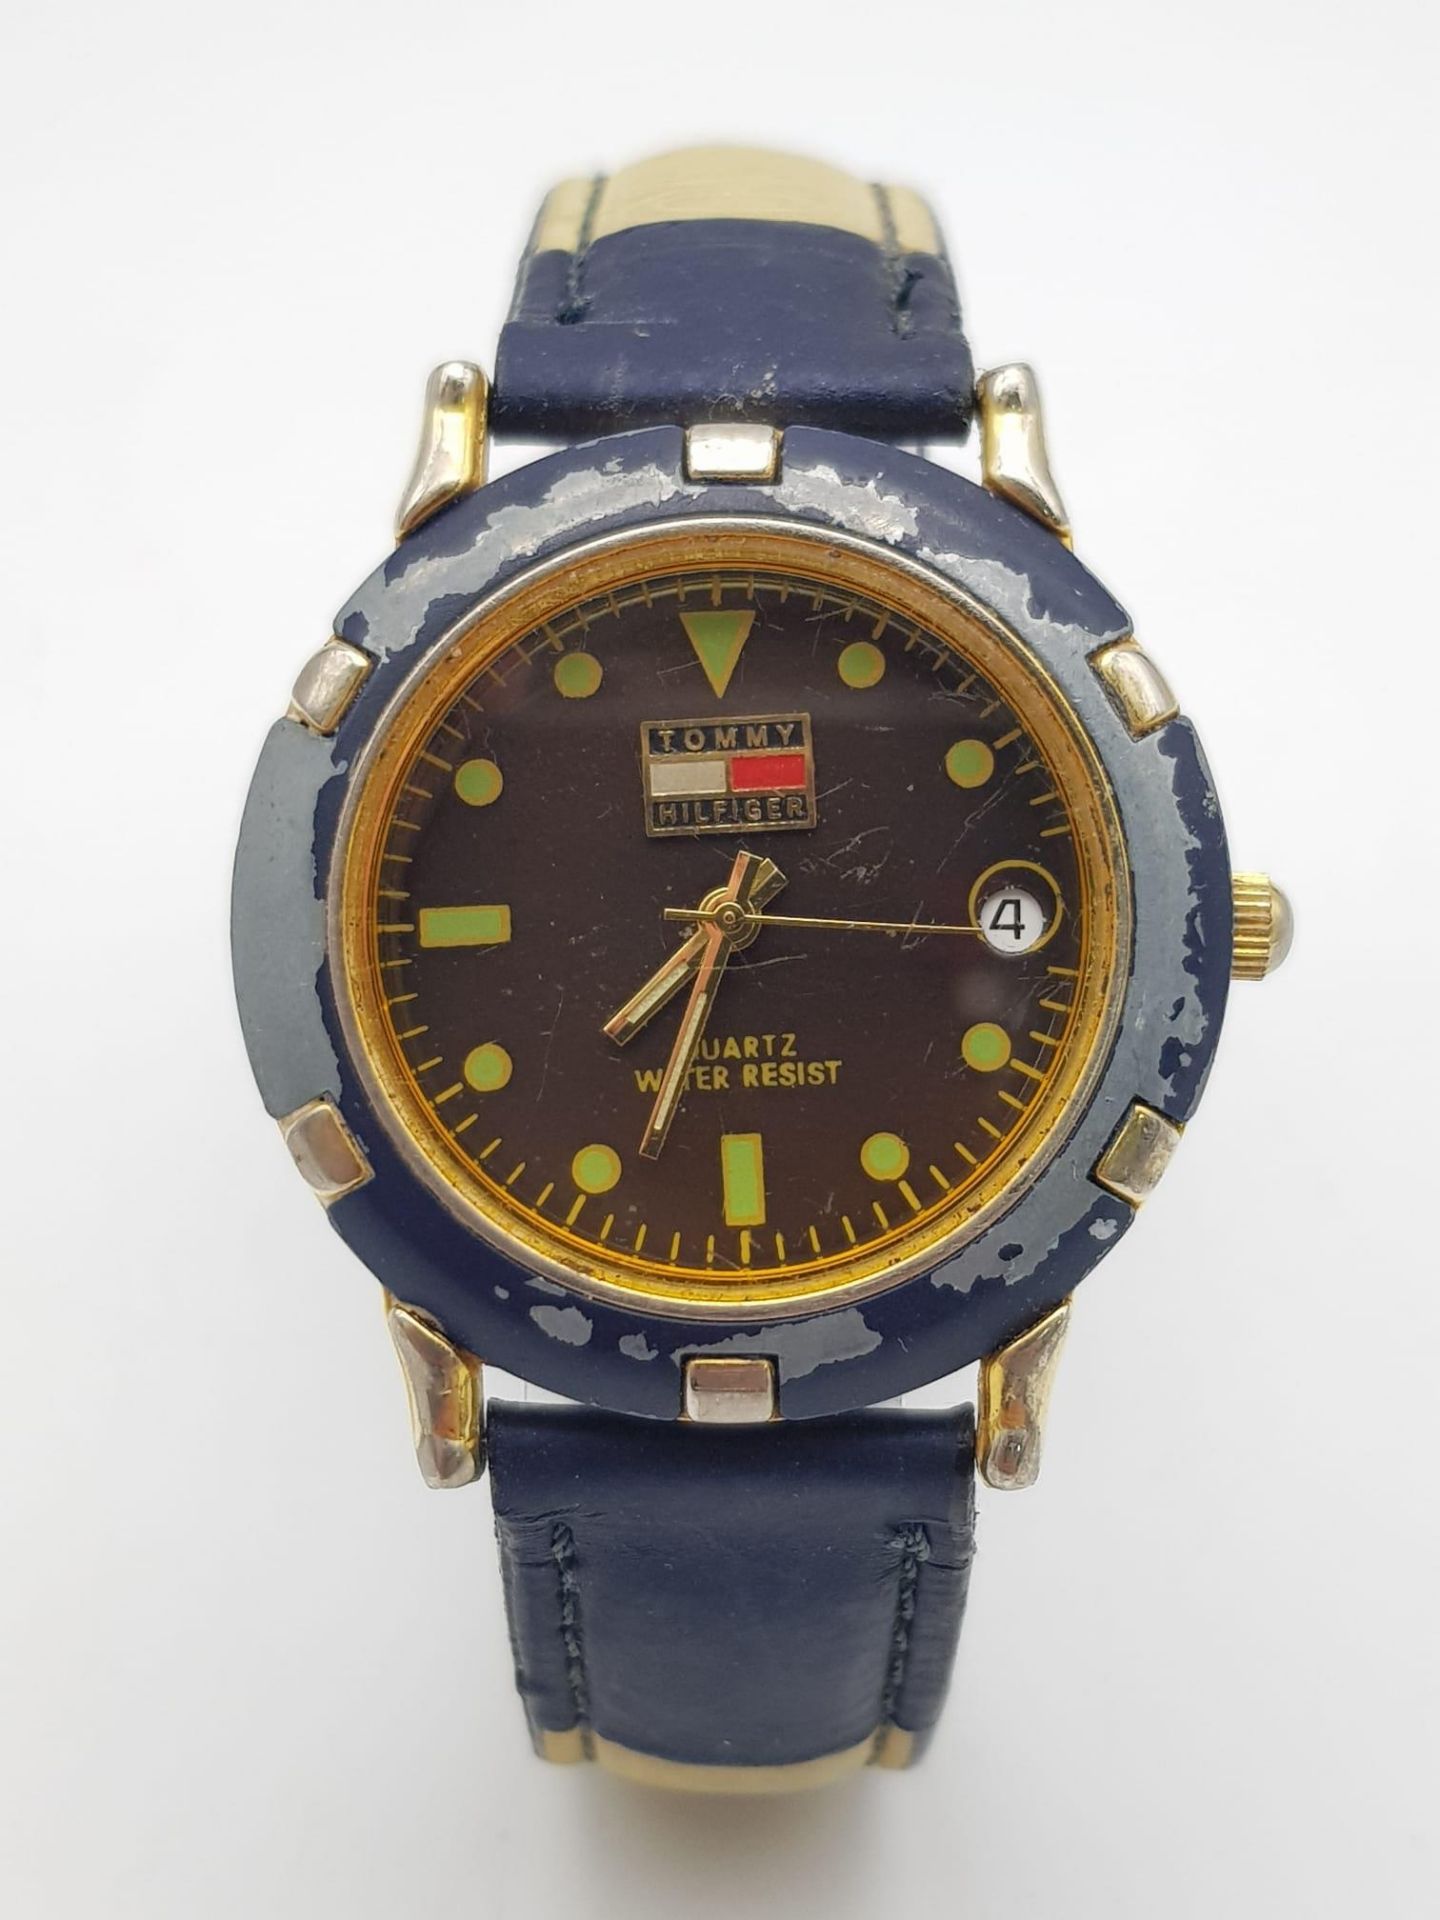 TOMMY HILFIGER WATCH REQUIRES NEW BATTERY AF - Image 2 of 5